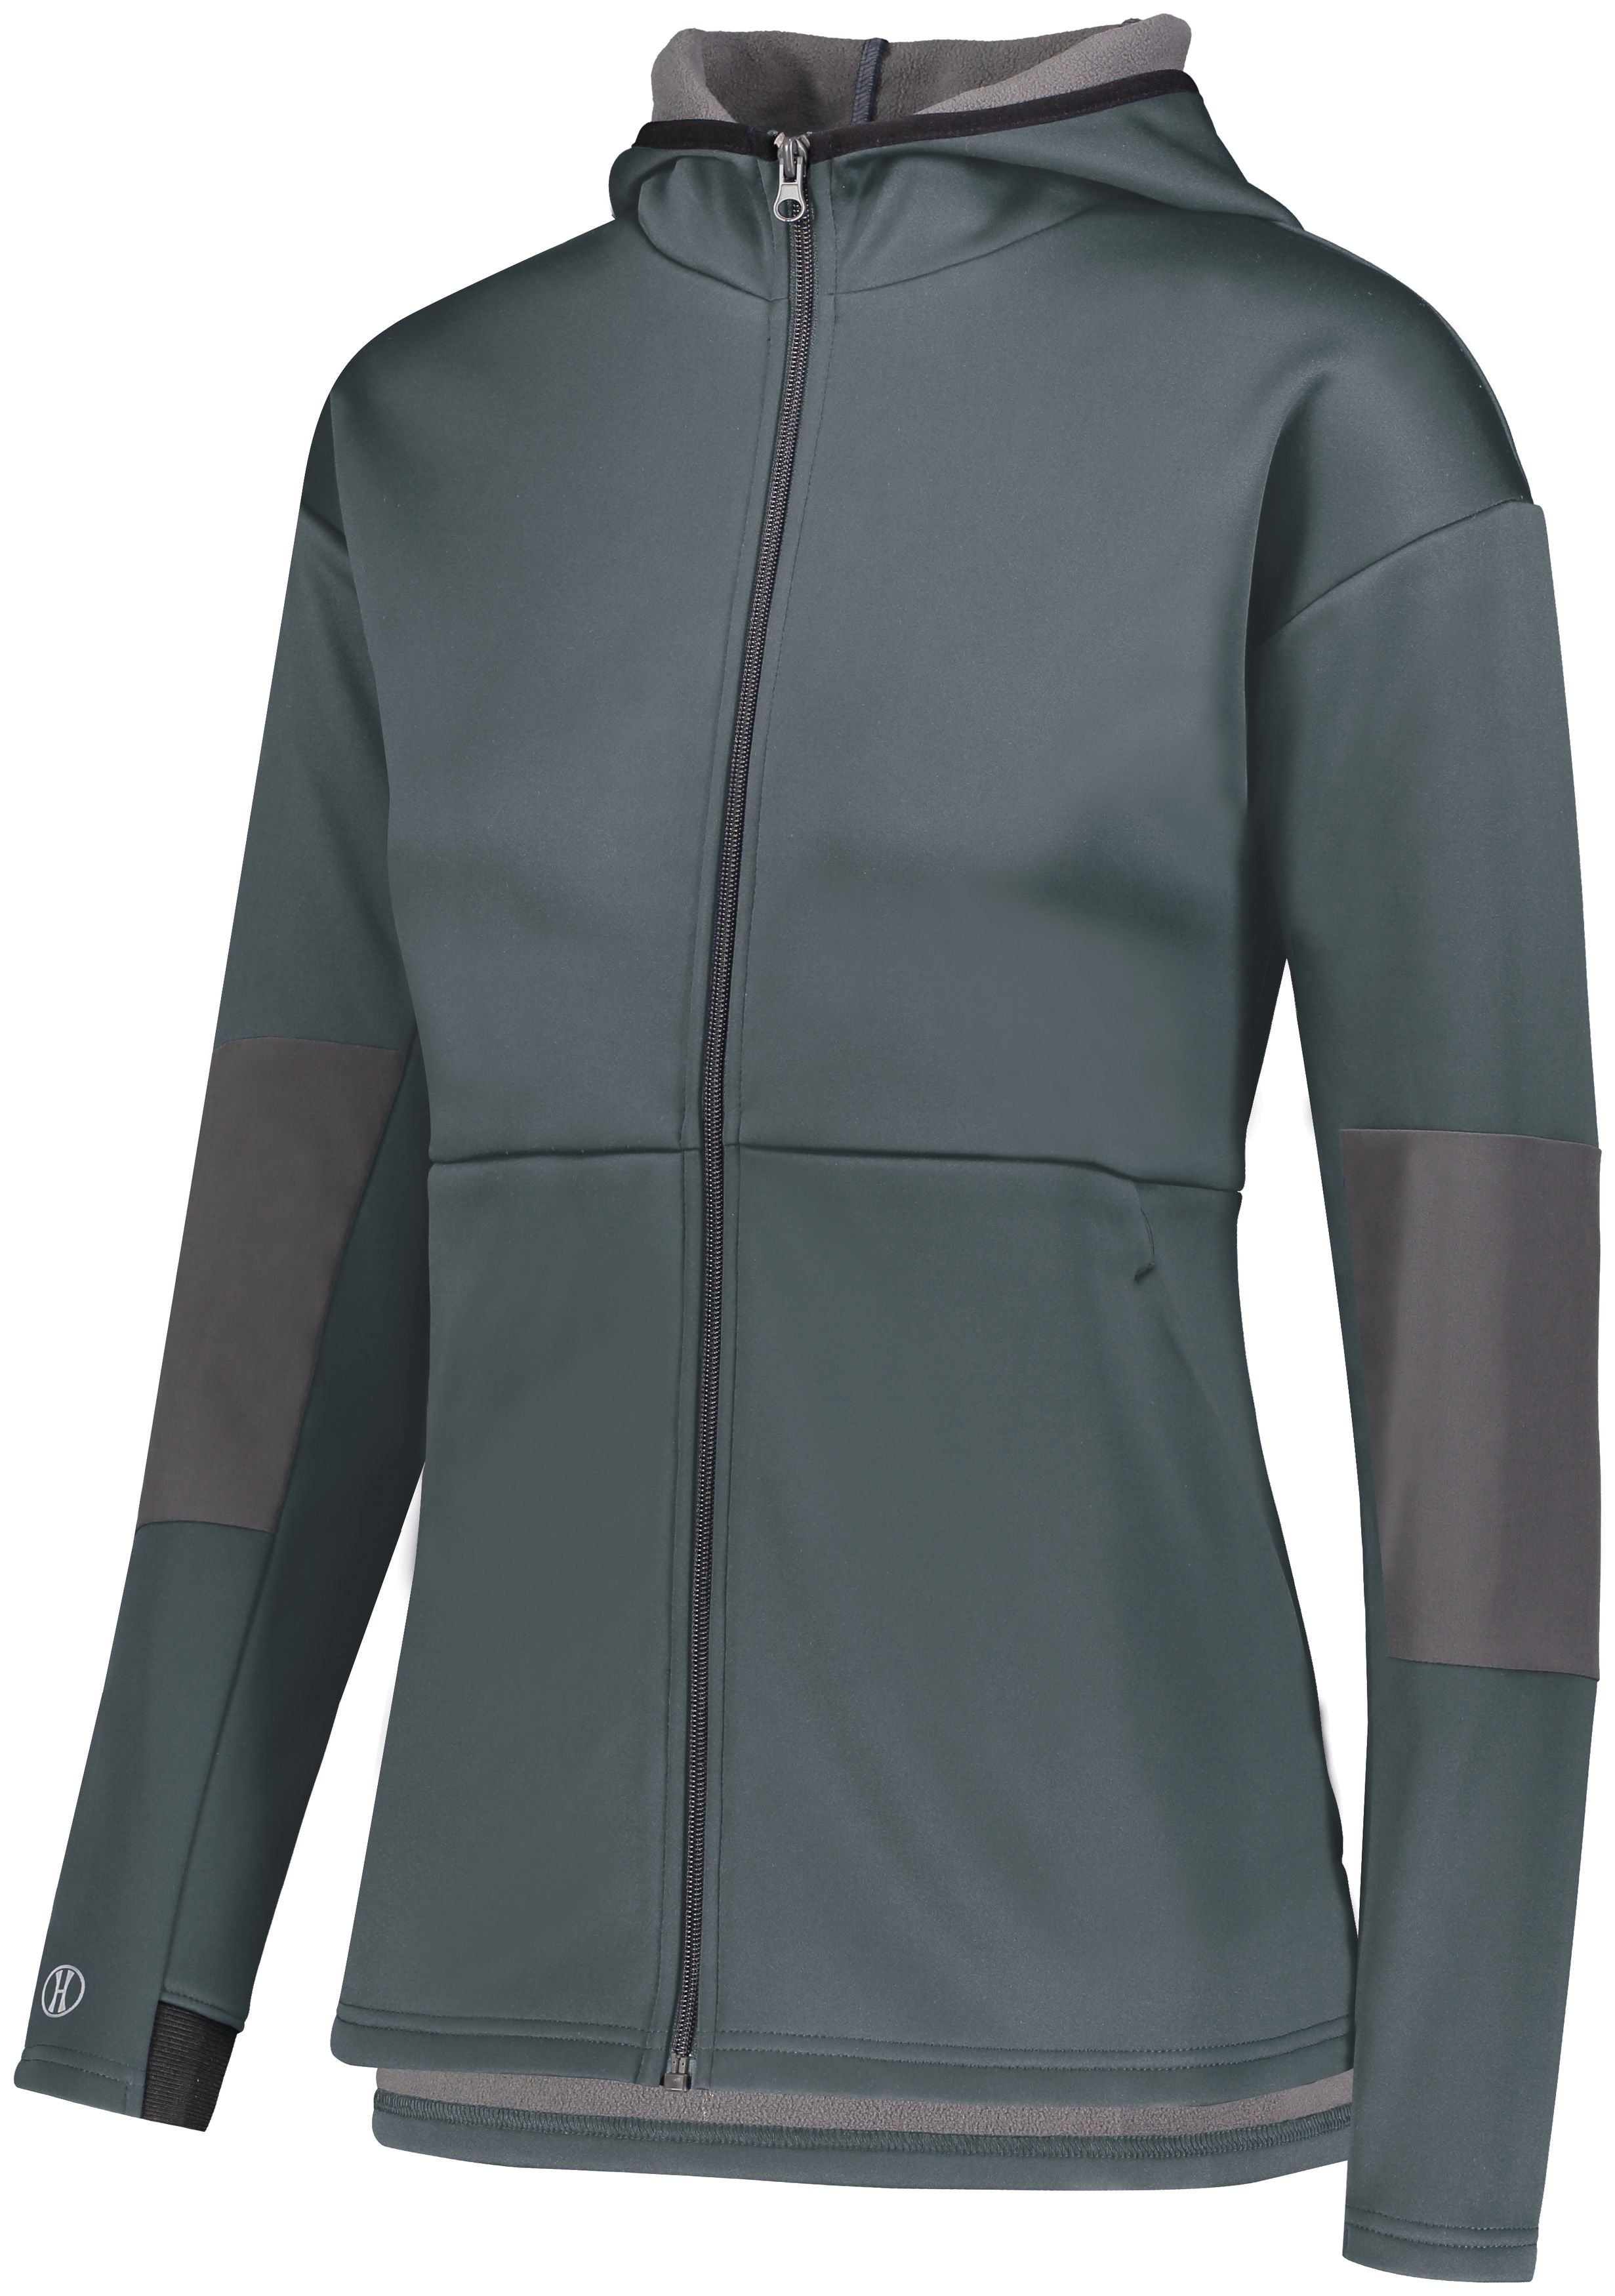 Holloway Ladies Sof-Stretch Jacket in Graphite/Carbon  -Part of the Ladies, Ladies-Jacket, Holloway, Outerwear product lines at KanaleyCreations.com